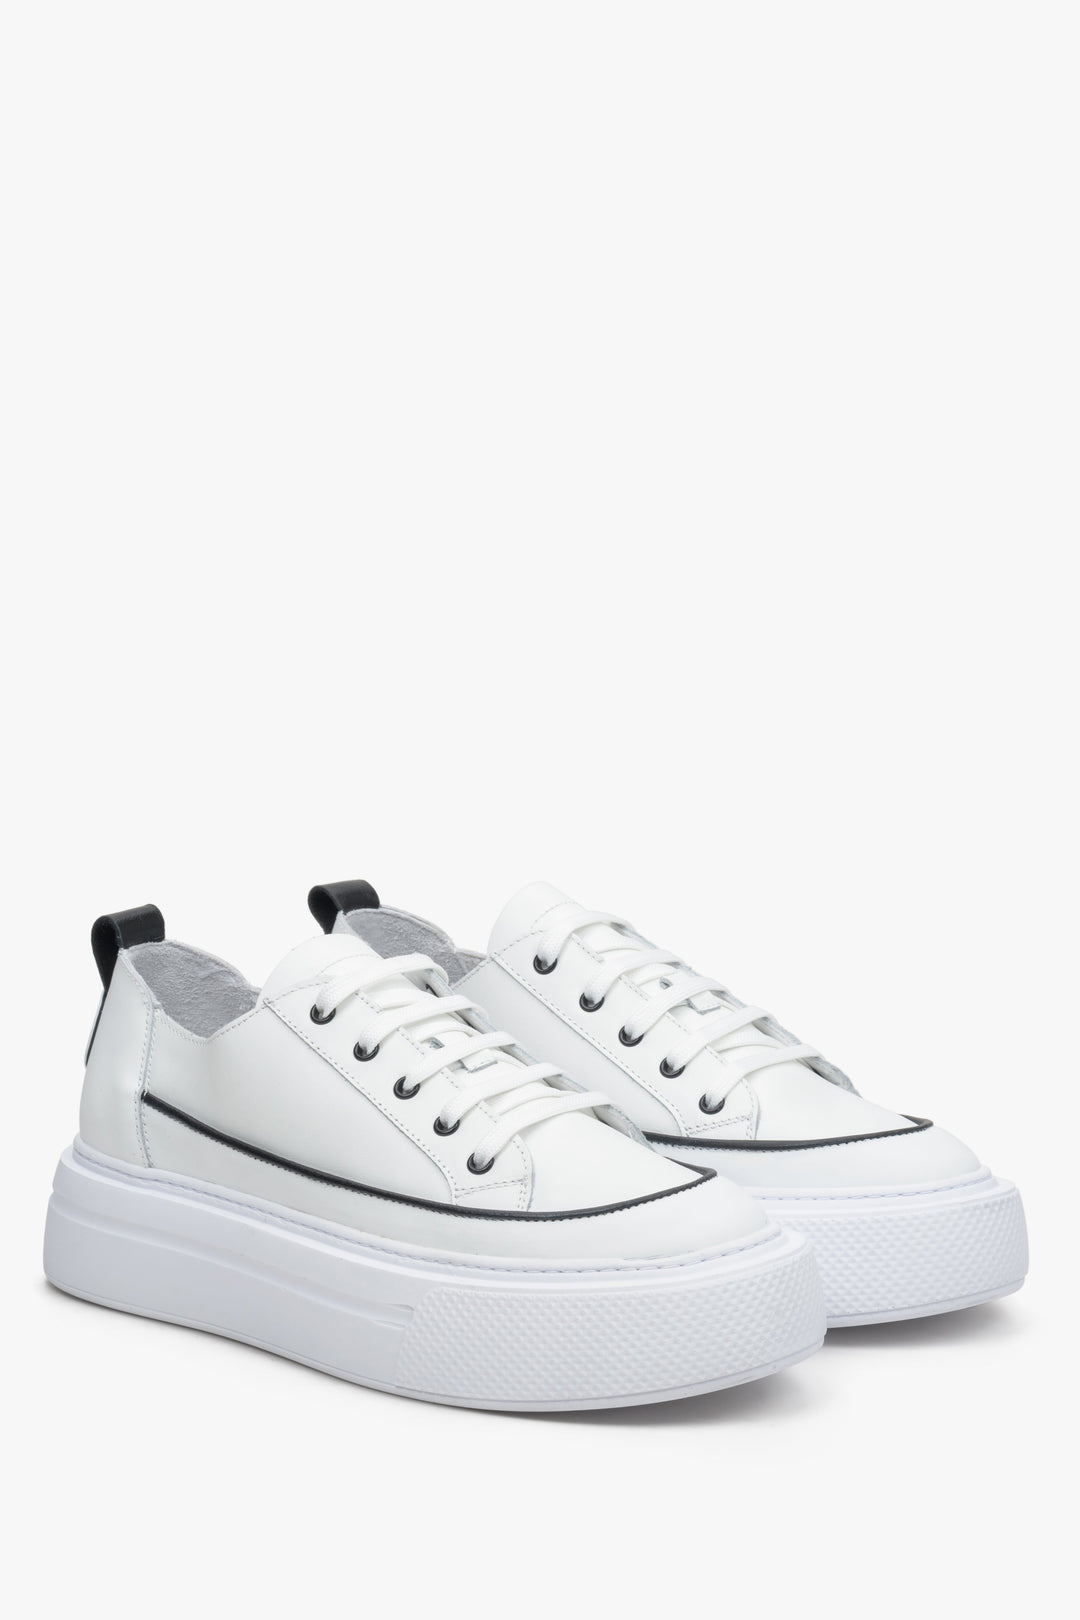 Women's low top sneakers made of genuine leather in white.